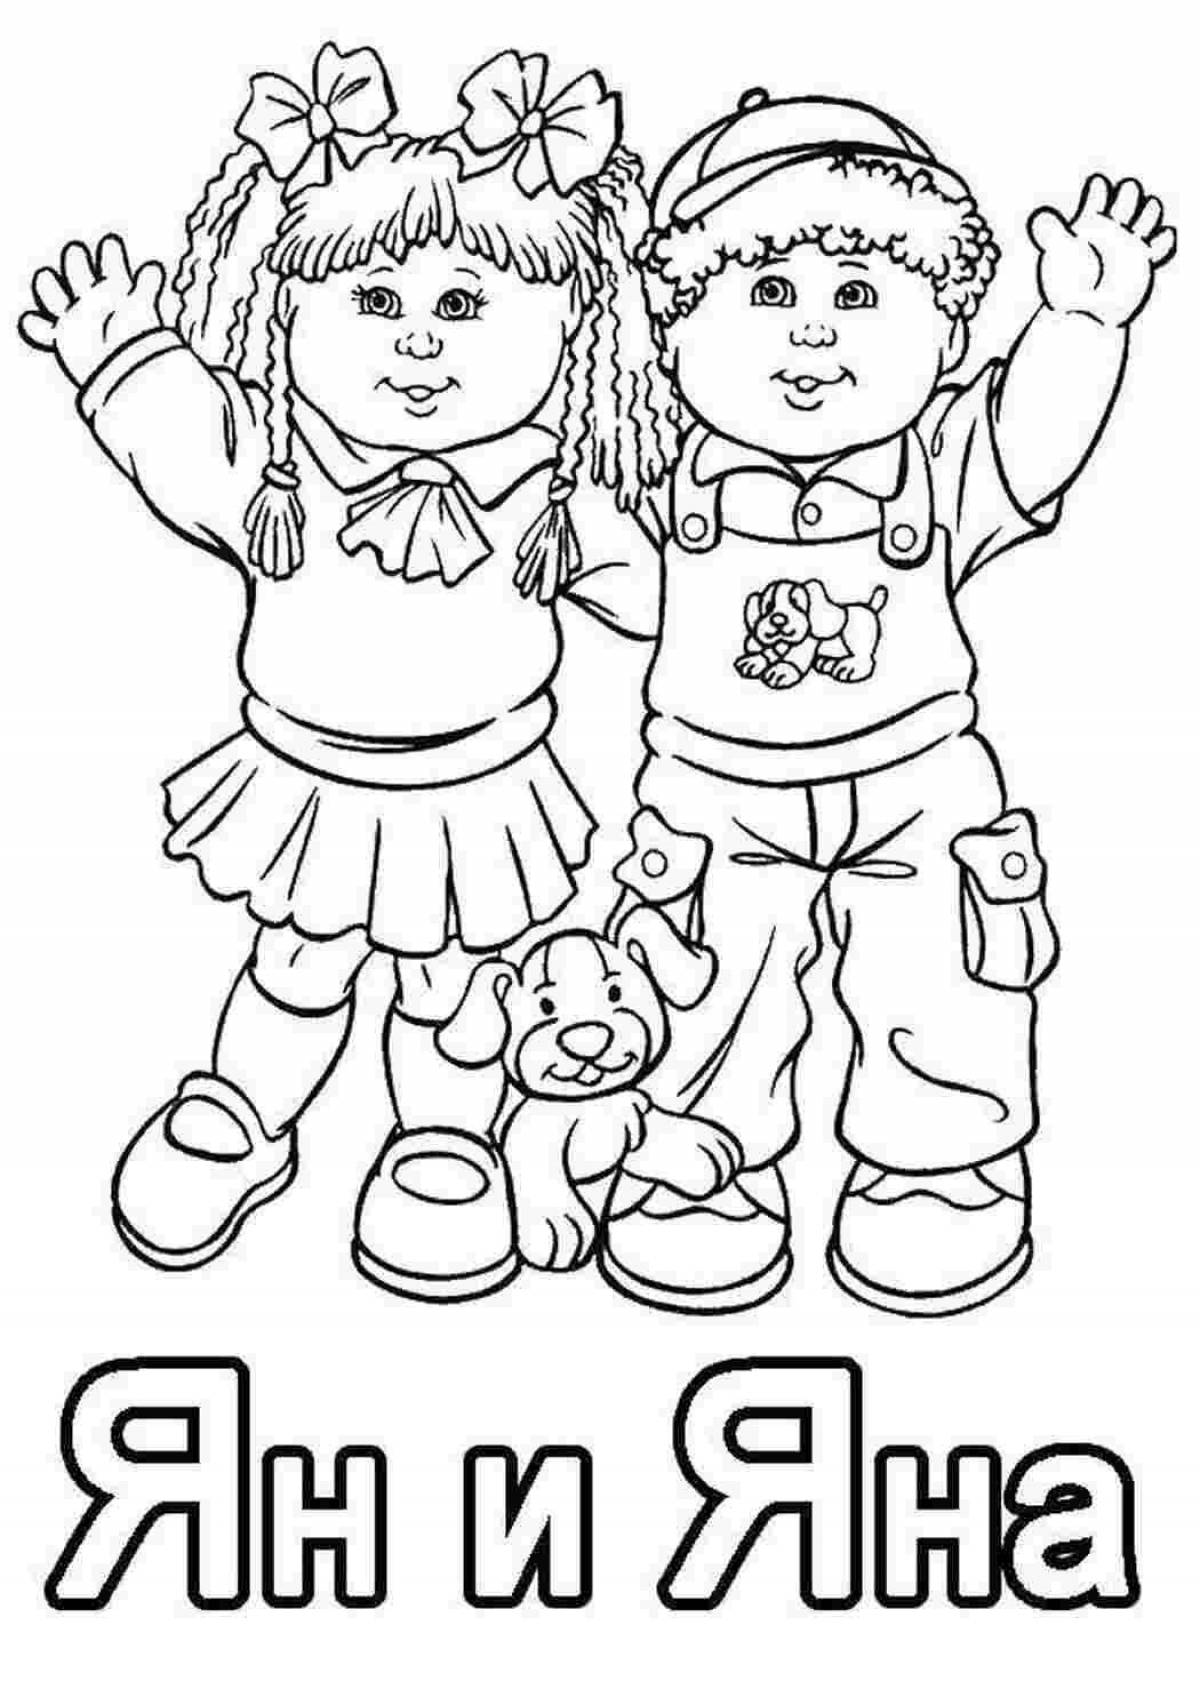 Bold Rights Coloring Page